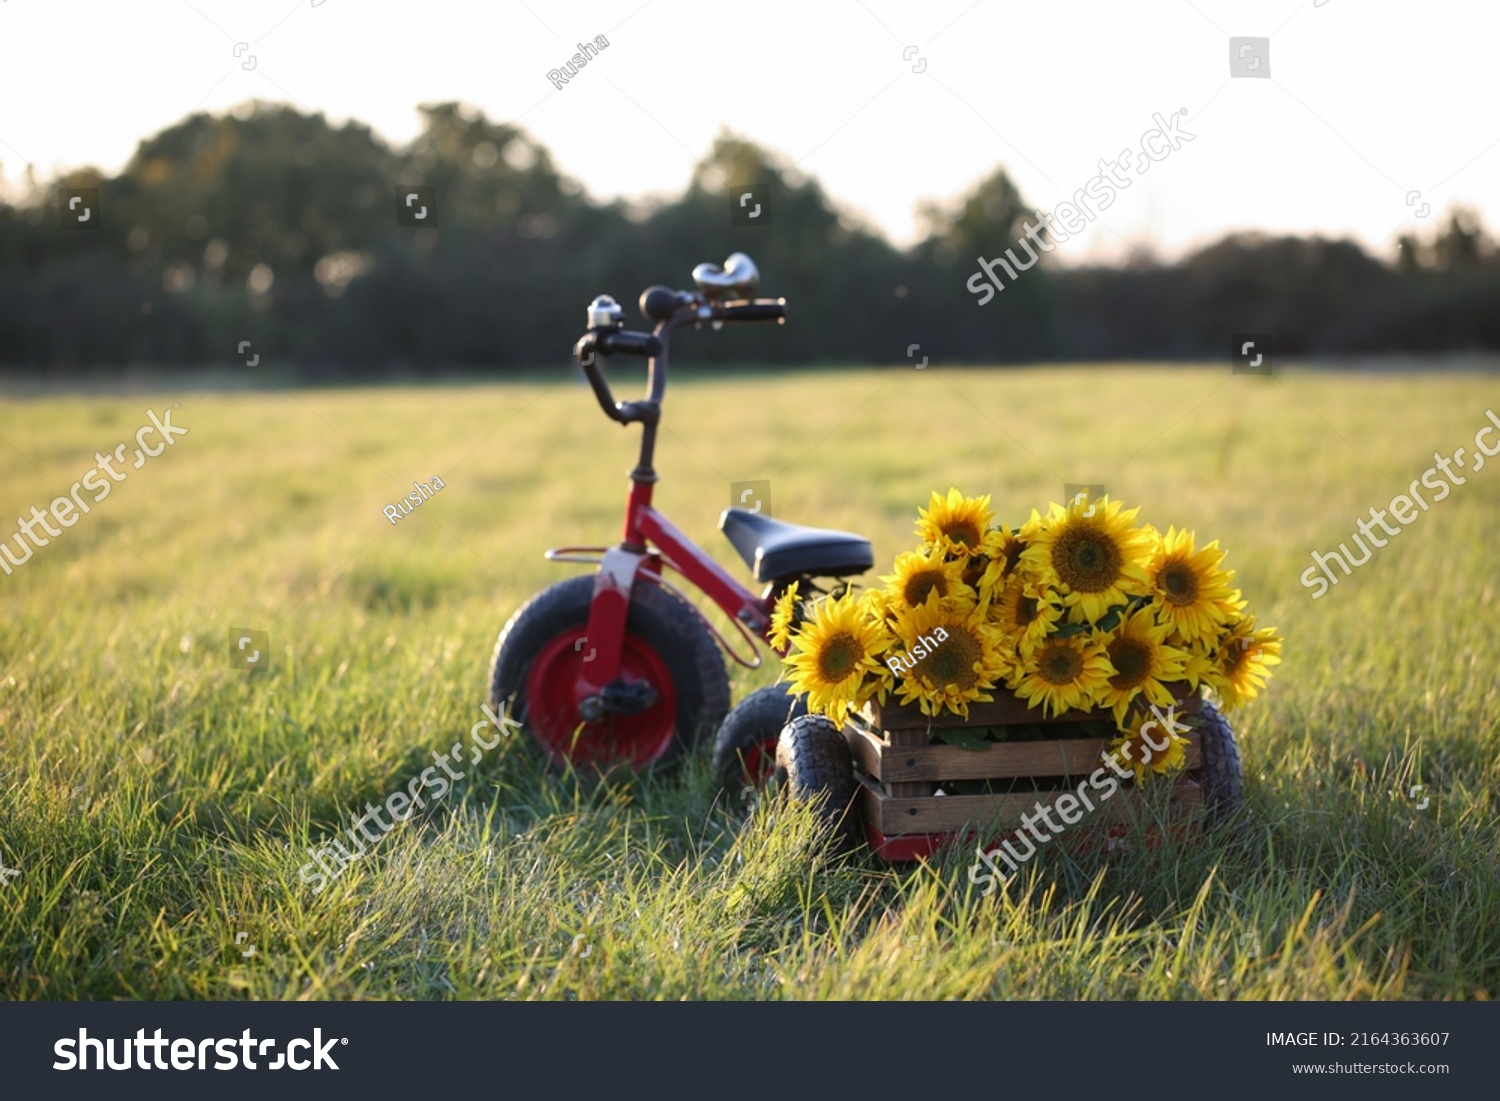 Children's bike trailer with sunflowers. Summer holidays in the countryside. Сarefree childhood, country lifestyle #2164363607